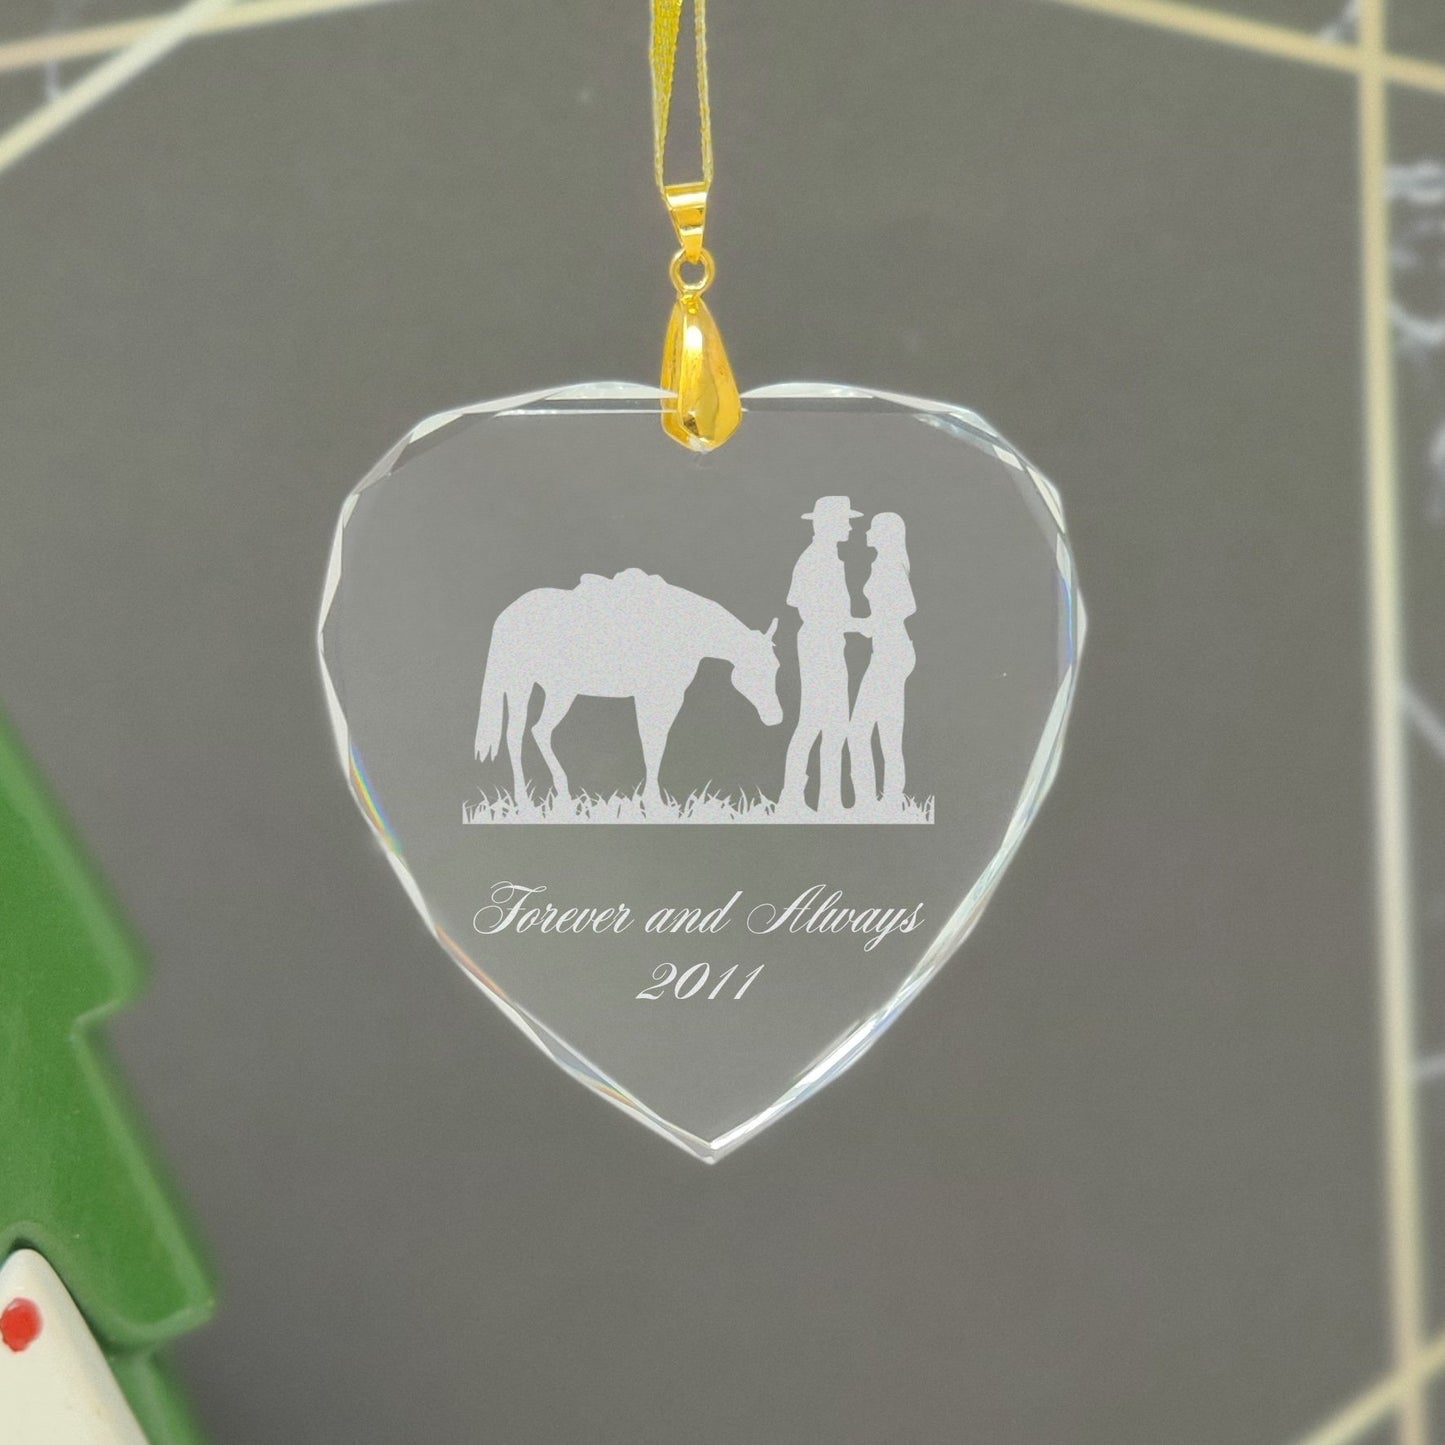 LaserGram Christmas Ornament, Zodiac Sign Cancer, Personalized Engraving Included (Heart Shape)